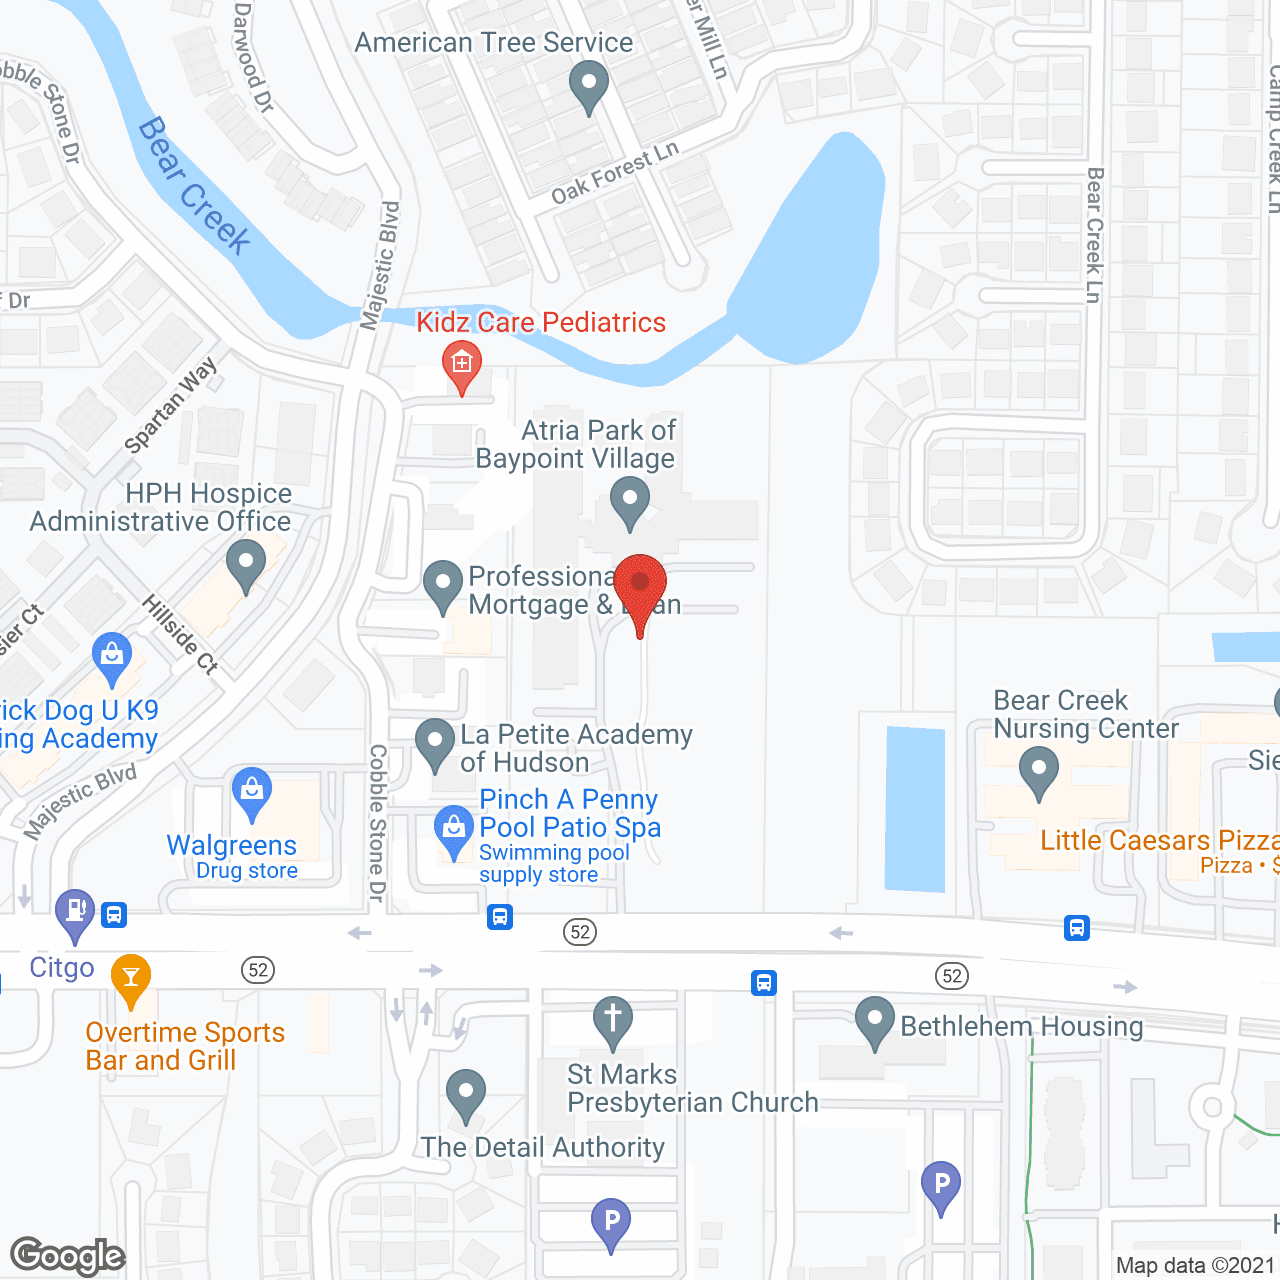 Vitality Living Baypoint Village in google map